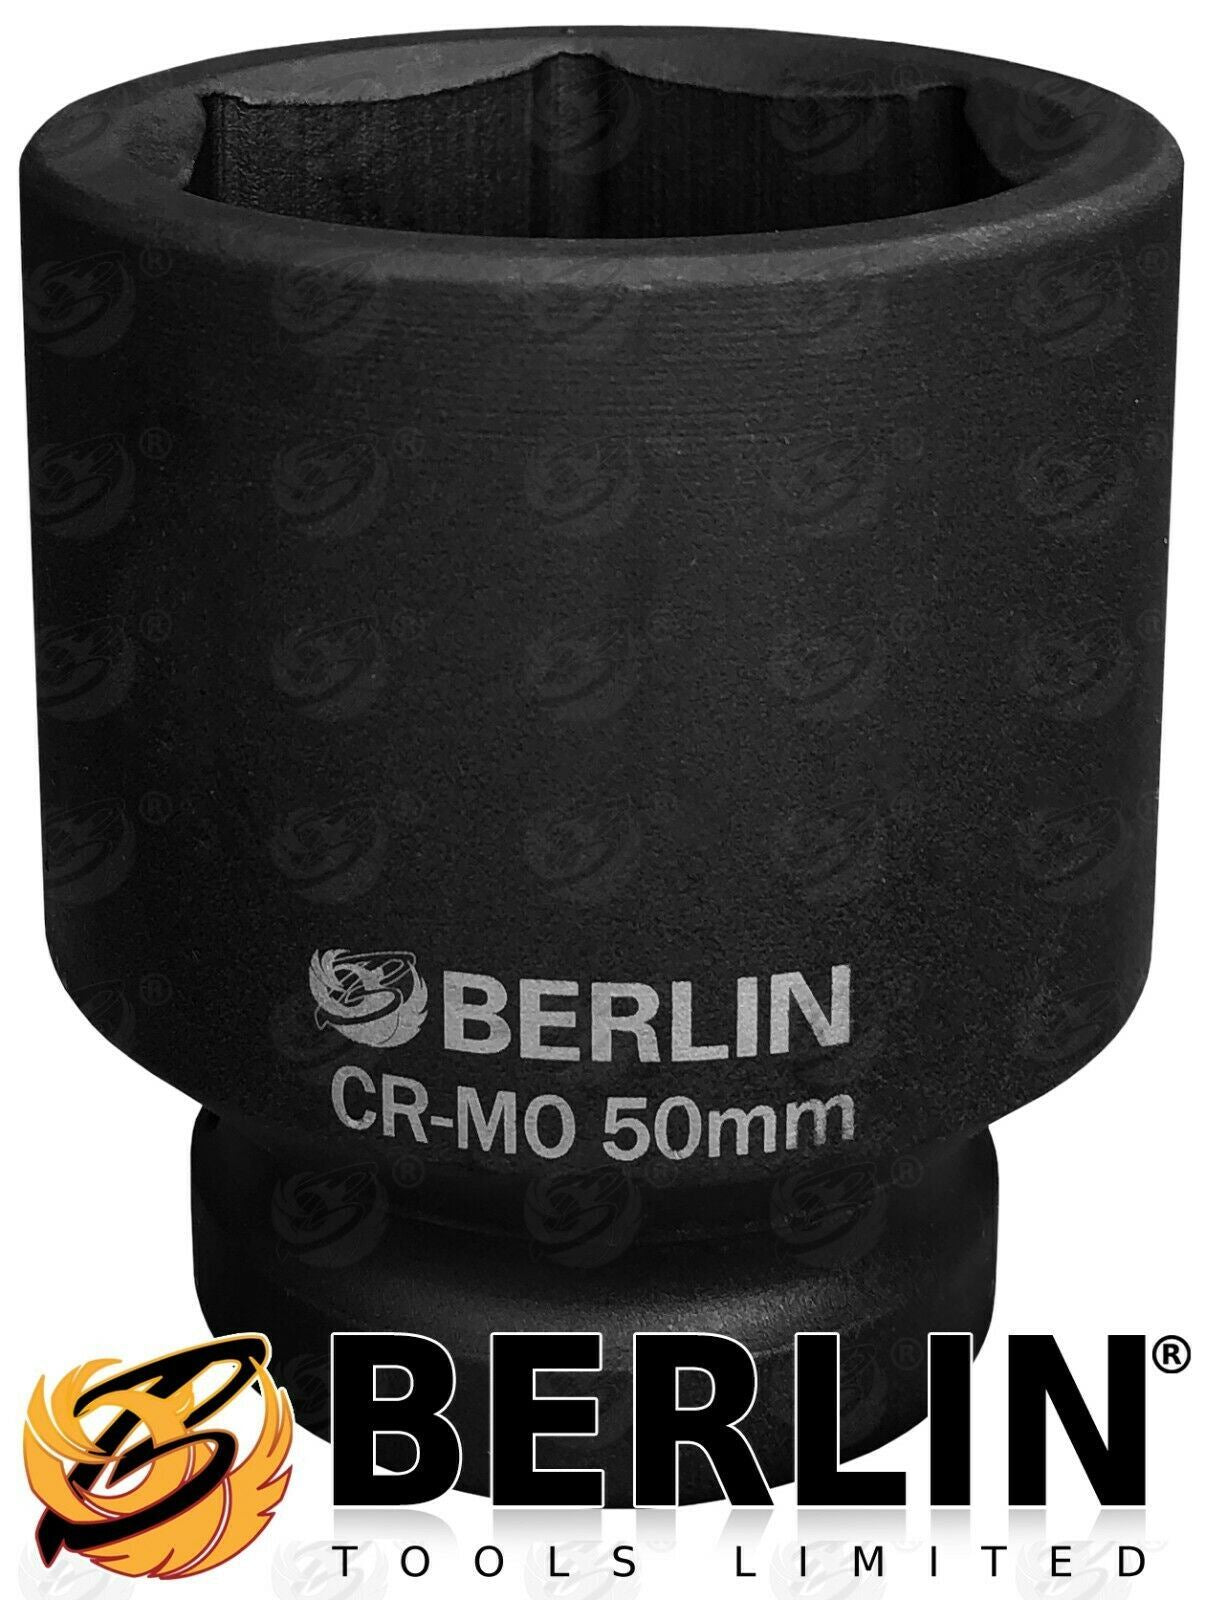 50mm Deep Impact Socket From Berlin Tools Limited